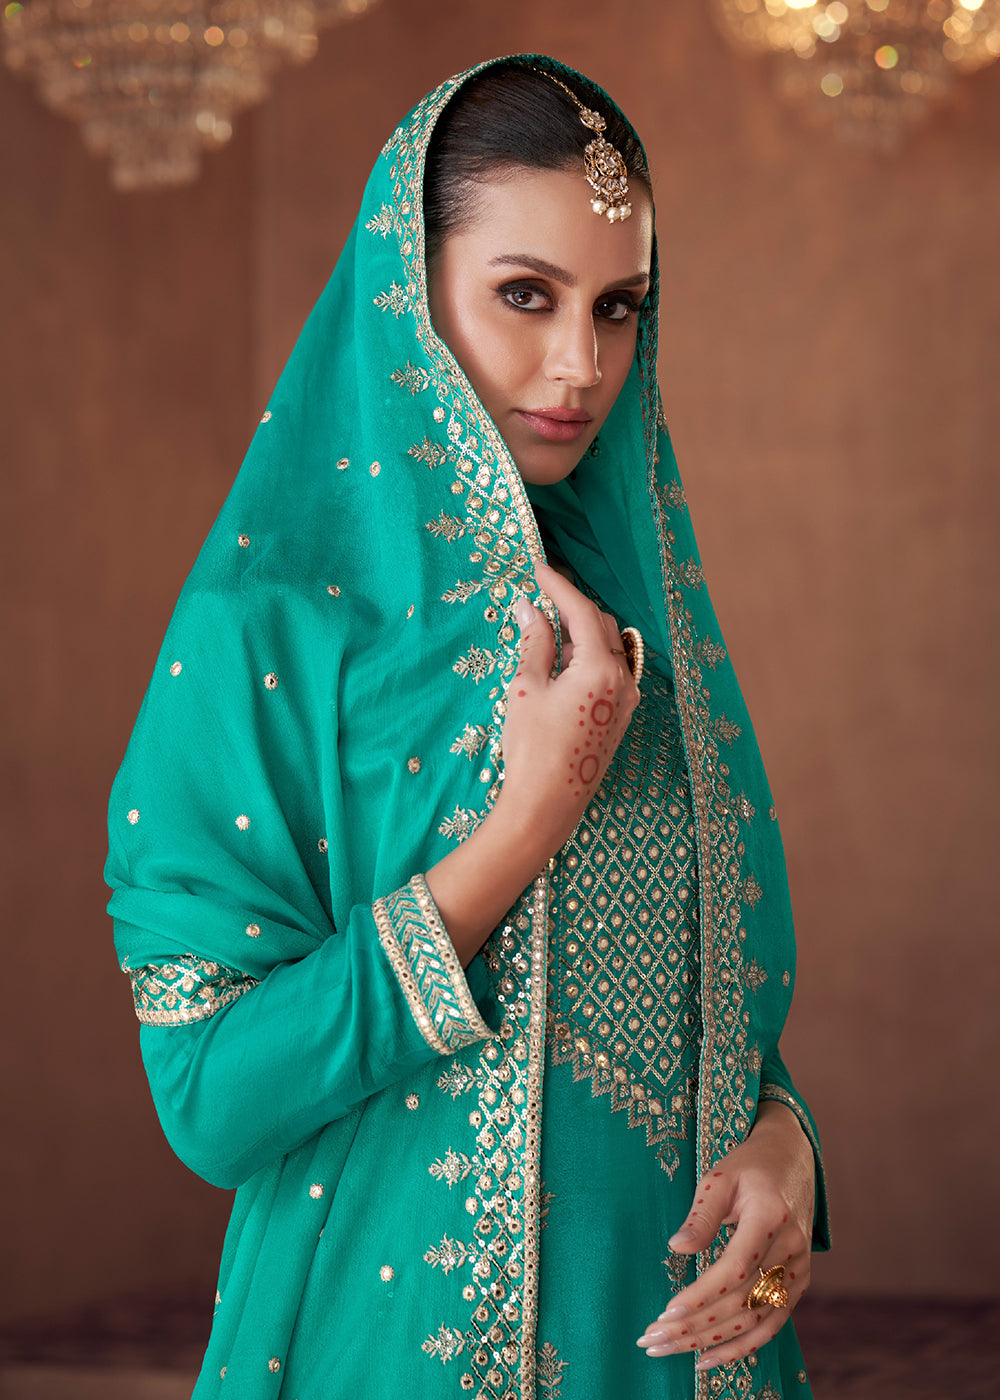 Buy Now Embellished Aqua Green Chinon & Georgette Designer Palazzo Suit Online in USA, UK, Canada, Germany, Australia & Worldwide at Empress Clothing.